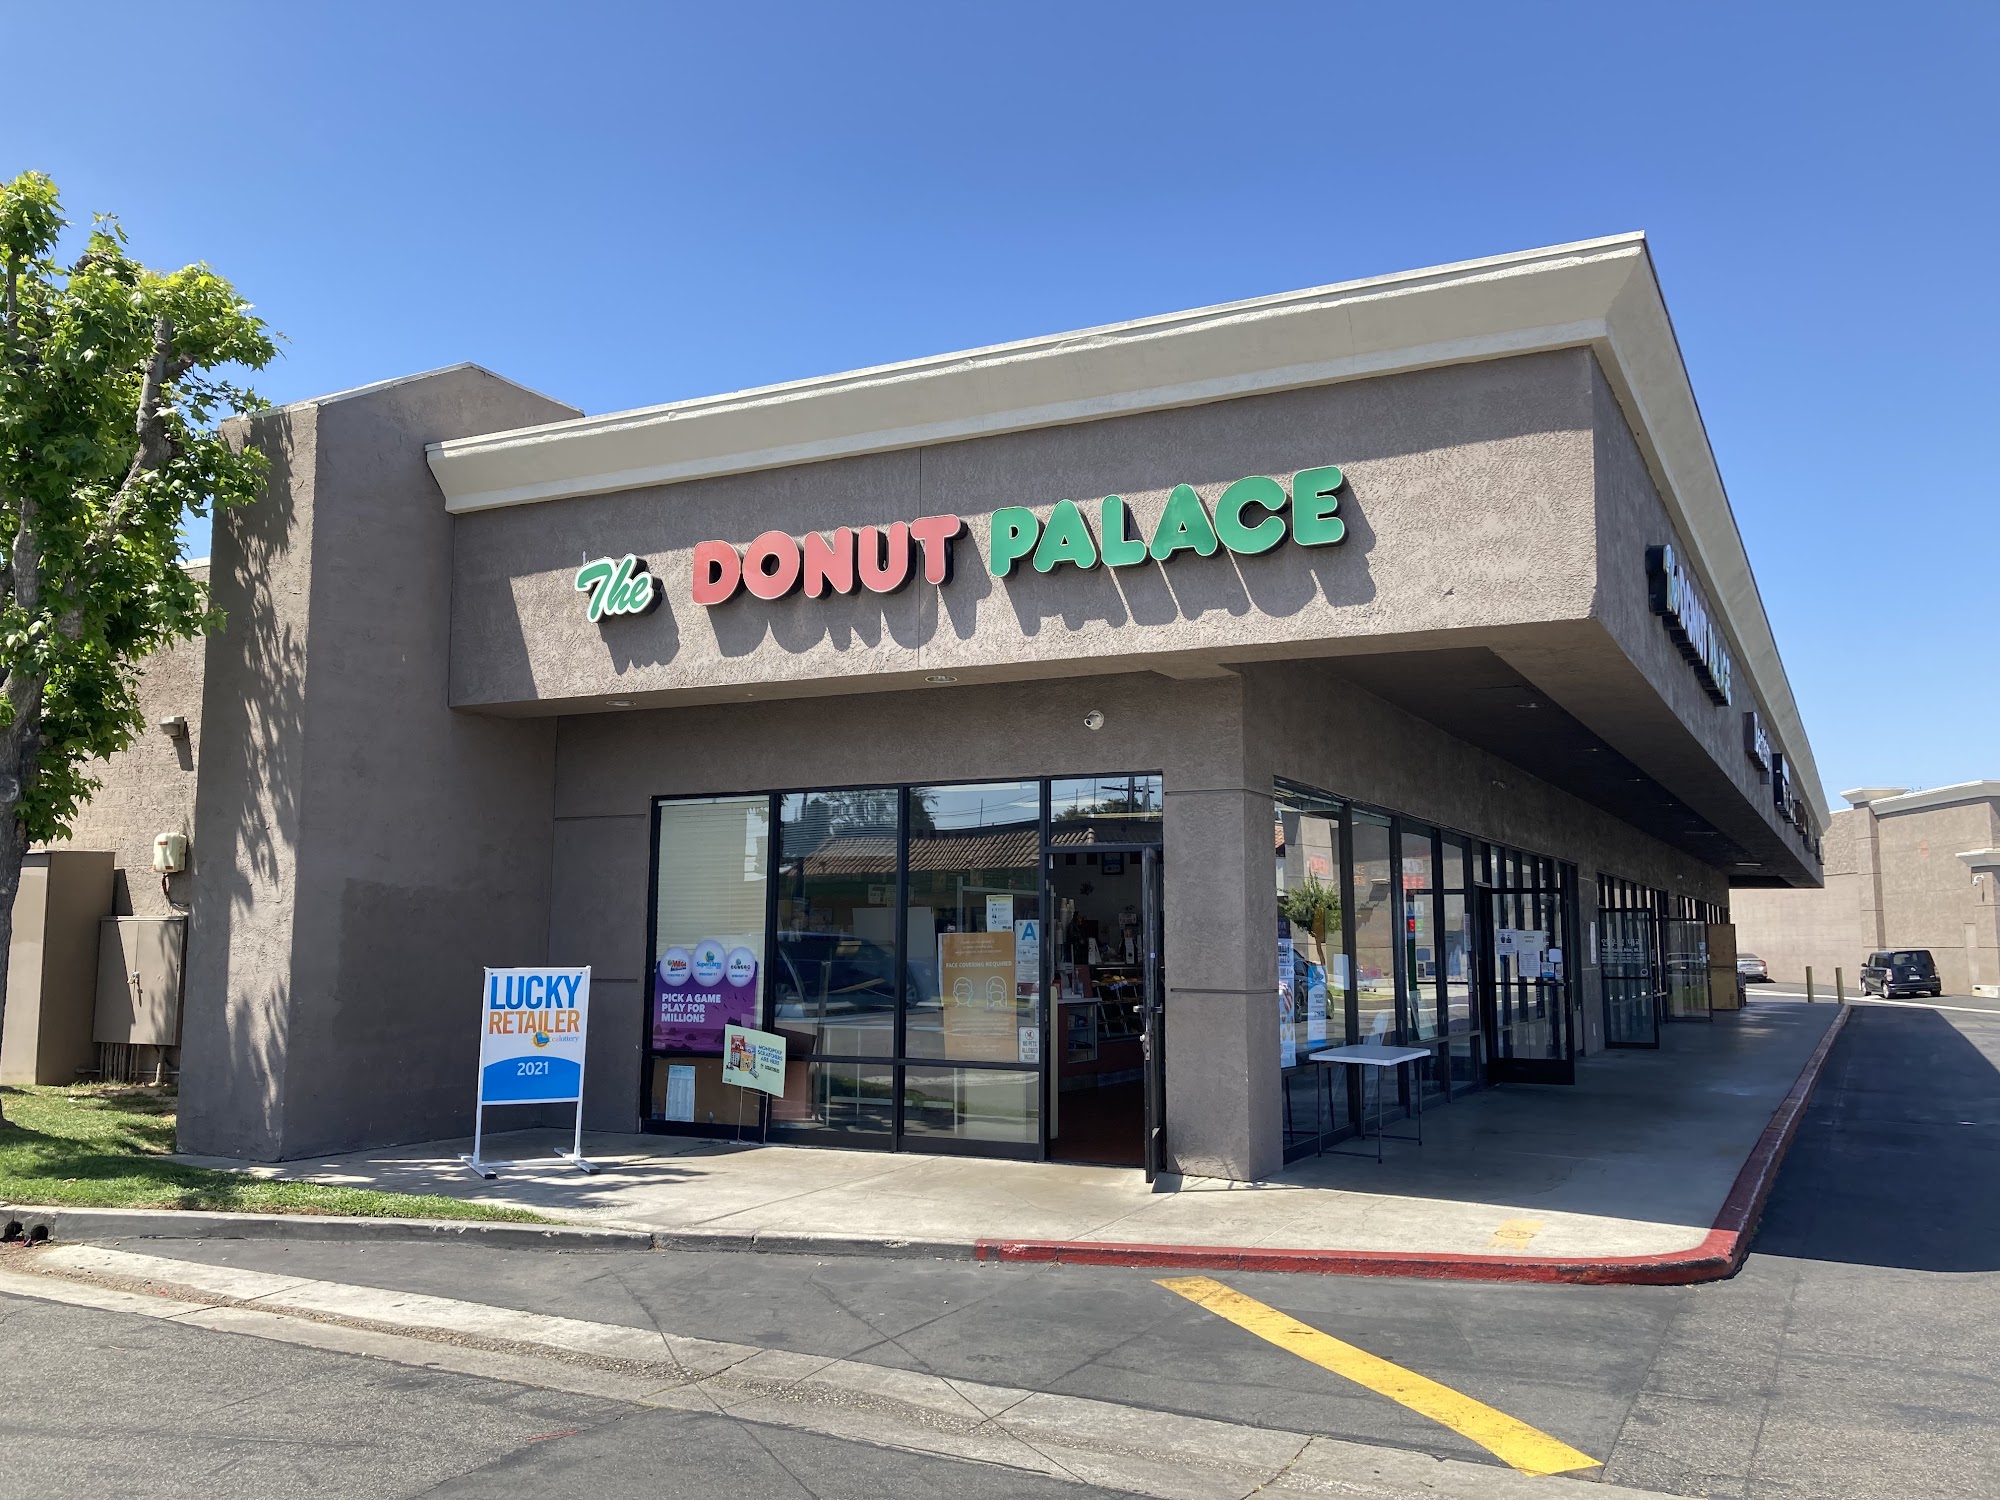 The Donut Palace